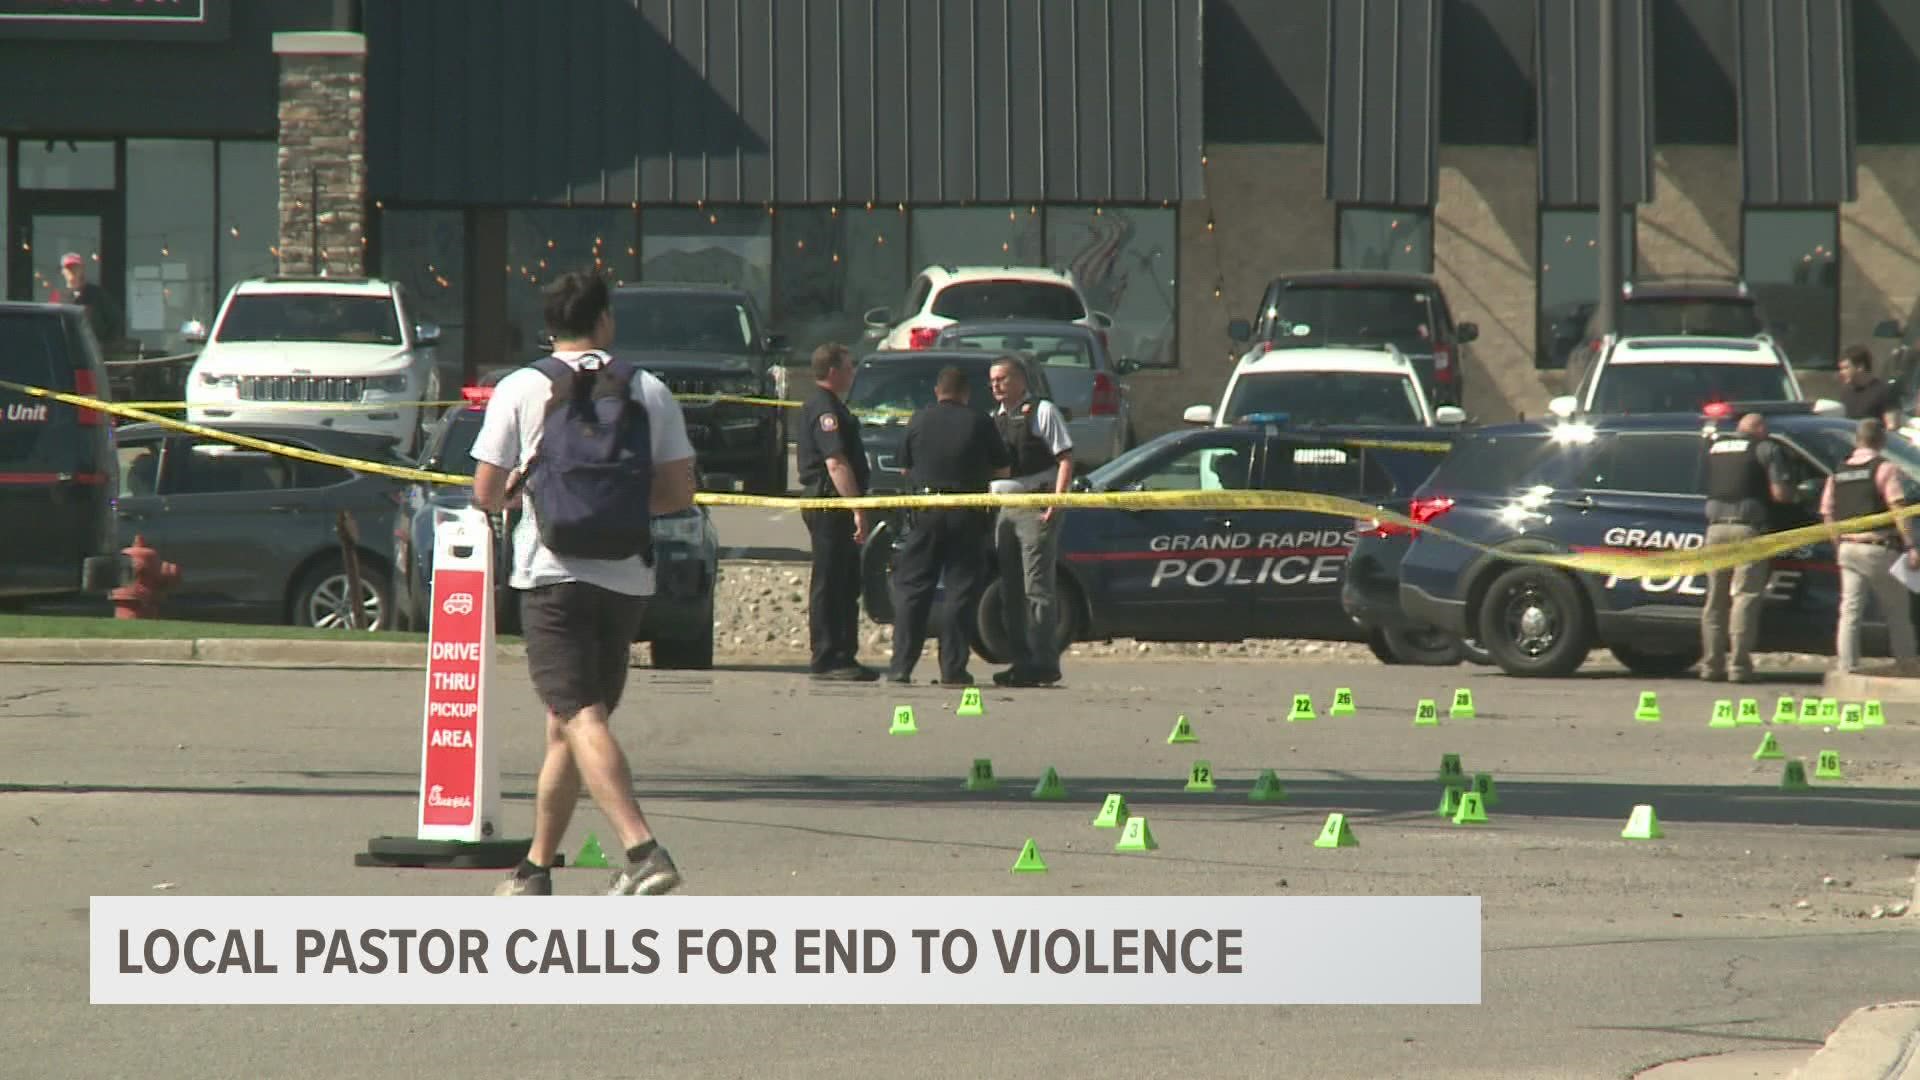 After three reported shootings in Grand Rapids in the past three days, a local leader is calling for the violence to end.